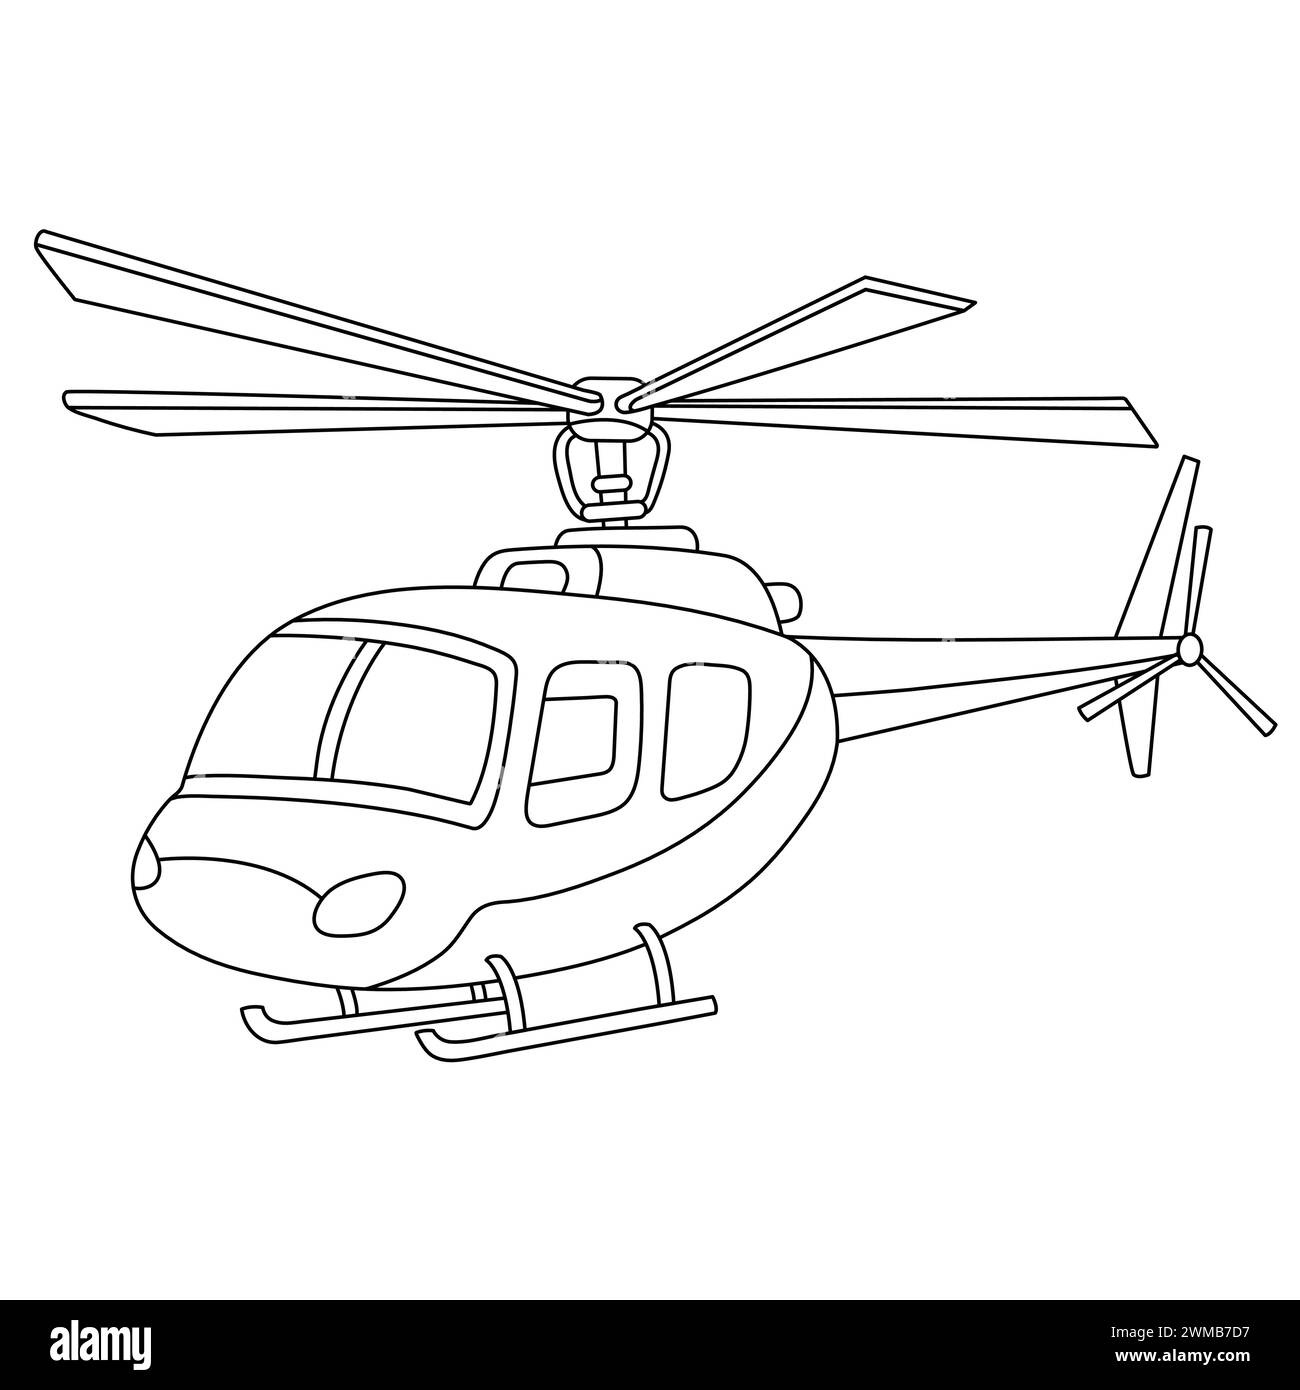 Cartoon helicopter coloring page. Military Helicopter outline illustration vector. Chopper isolated on white background. Copter drawing Stock Vector